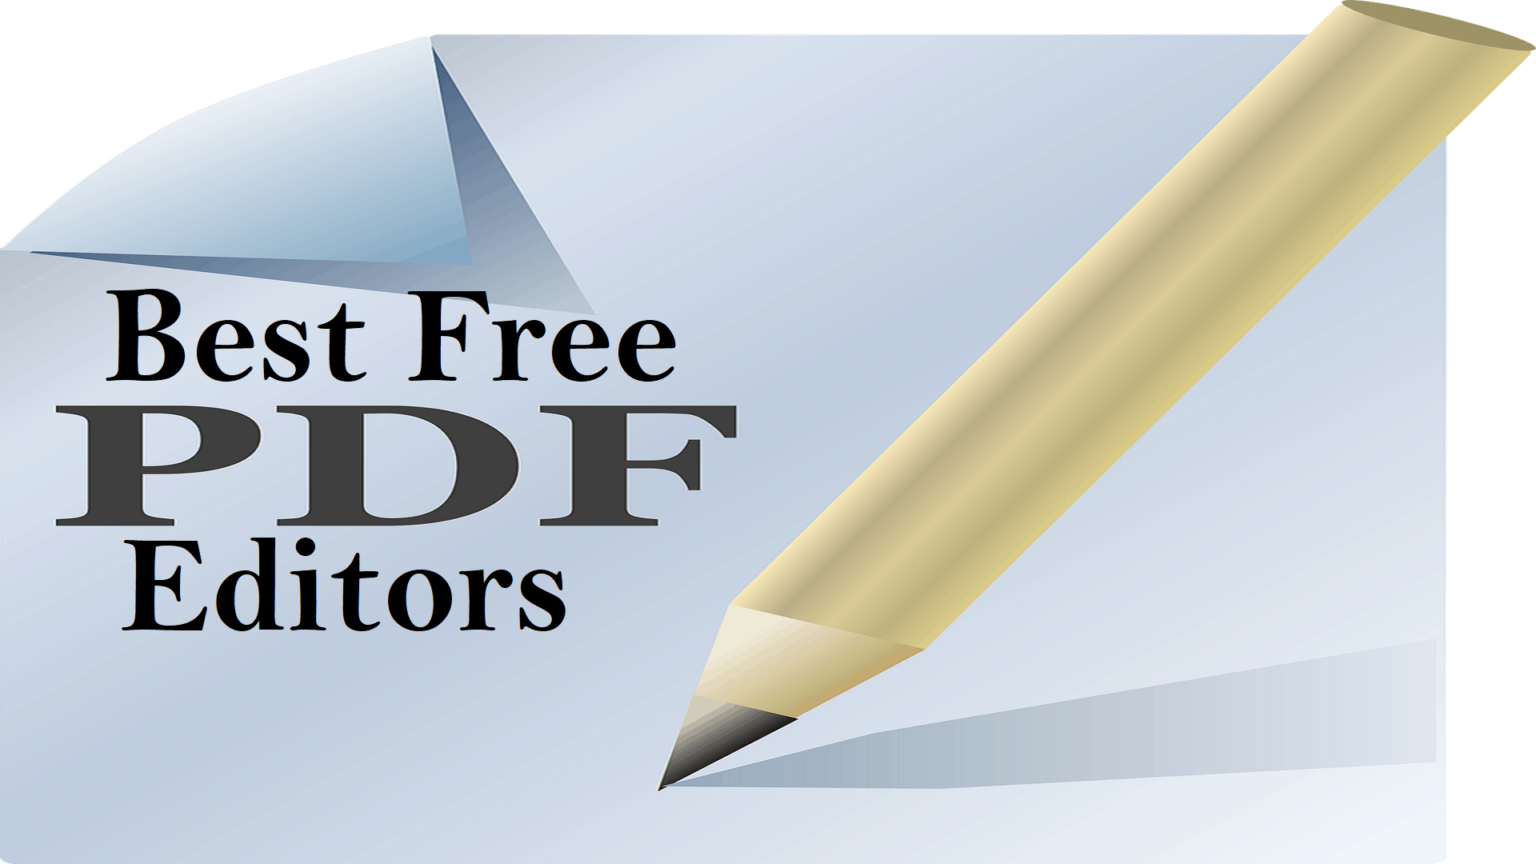 pdf software for windows free download